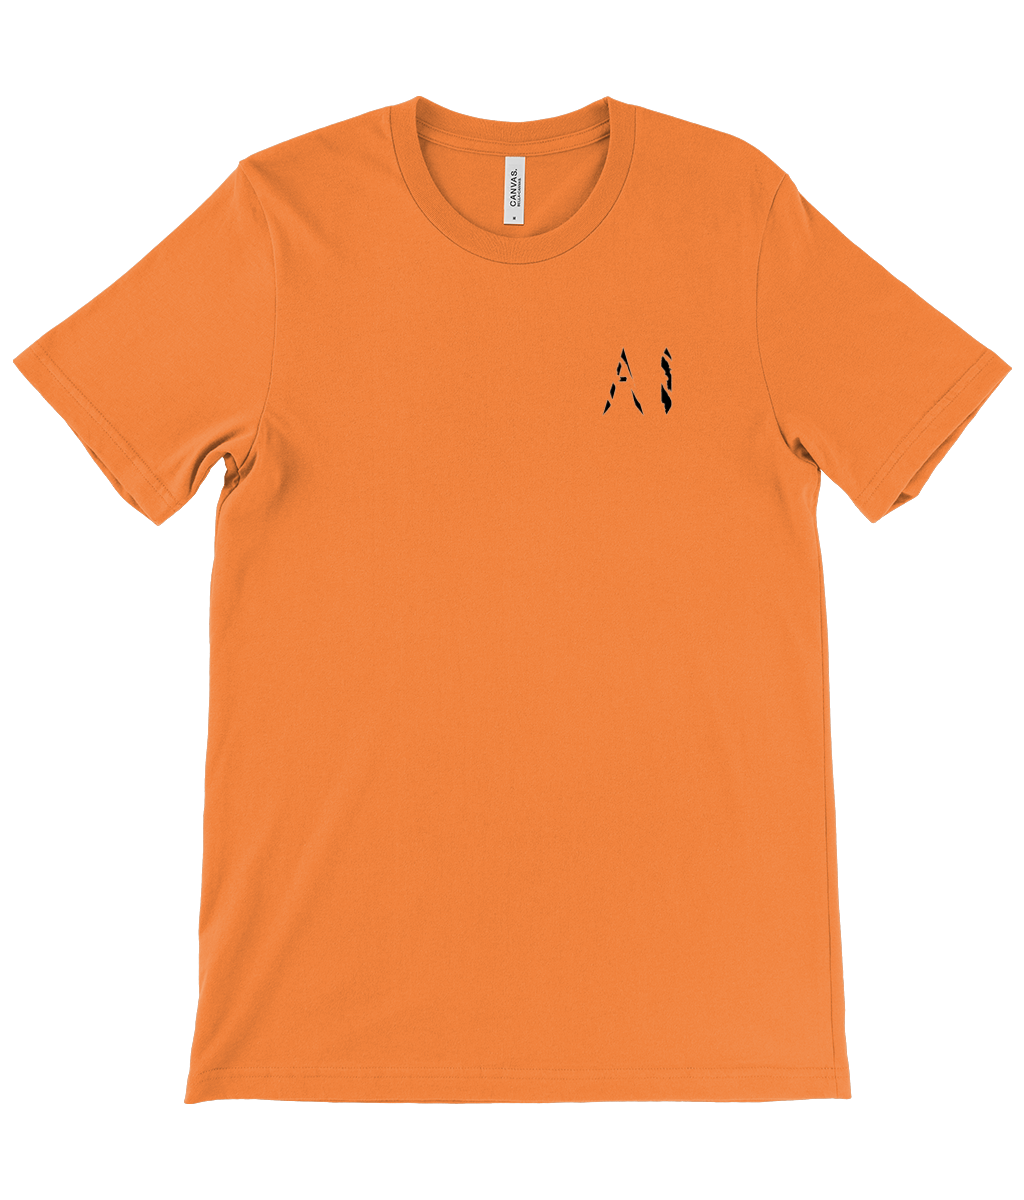 Mens orange Casual T-Shirt with black AI logo on the left chest